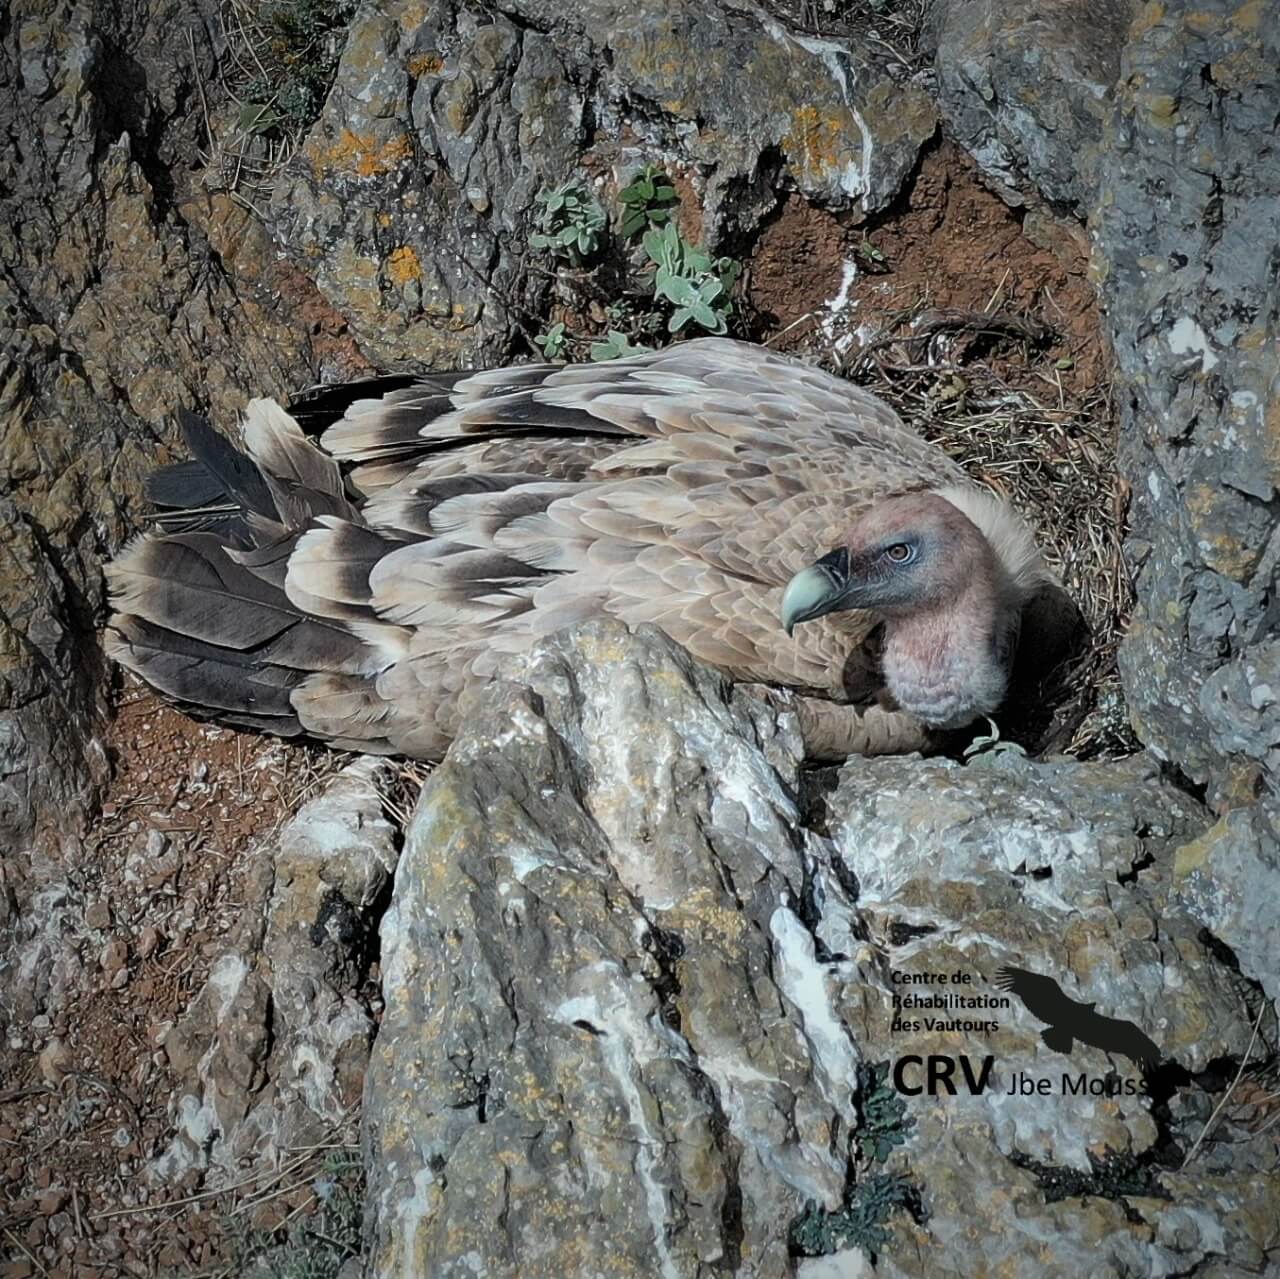 Griffon Vulture incubating its eggs at Jbel Moussa, northern Morocco (CRV Jbel Moussa, DEF, GREPOM)